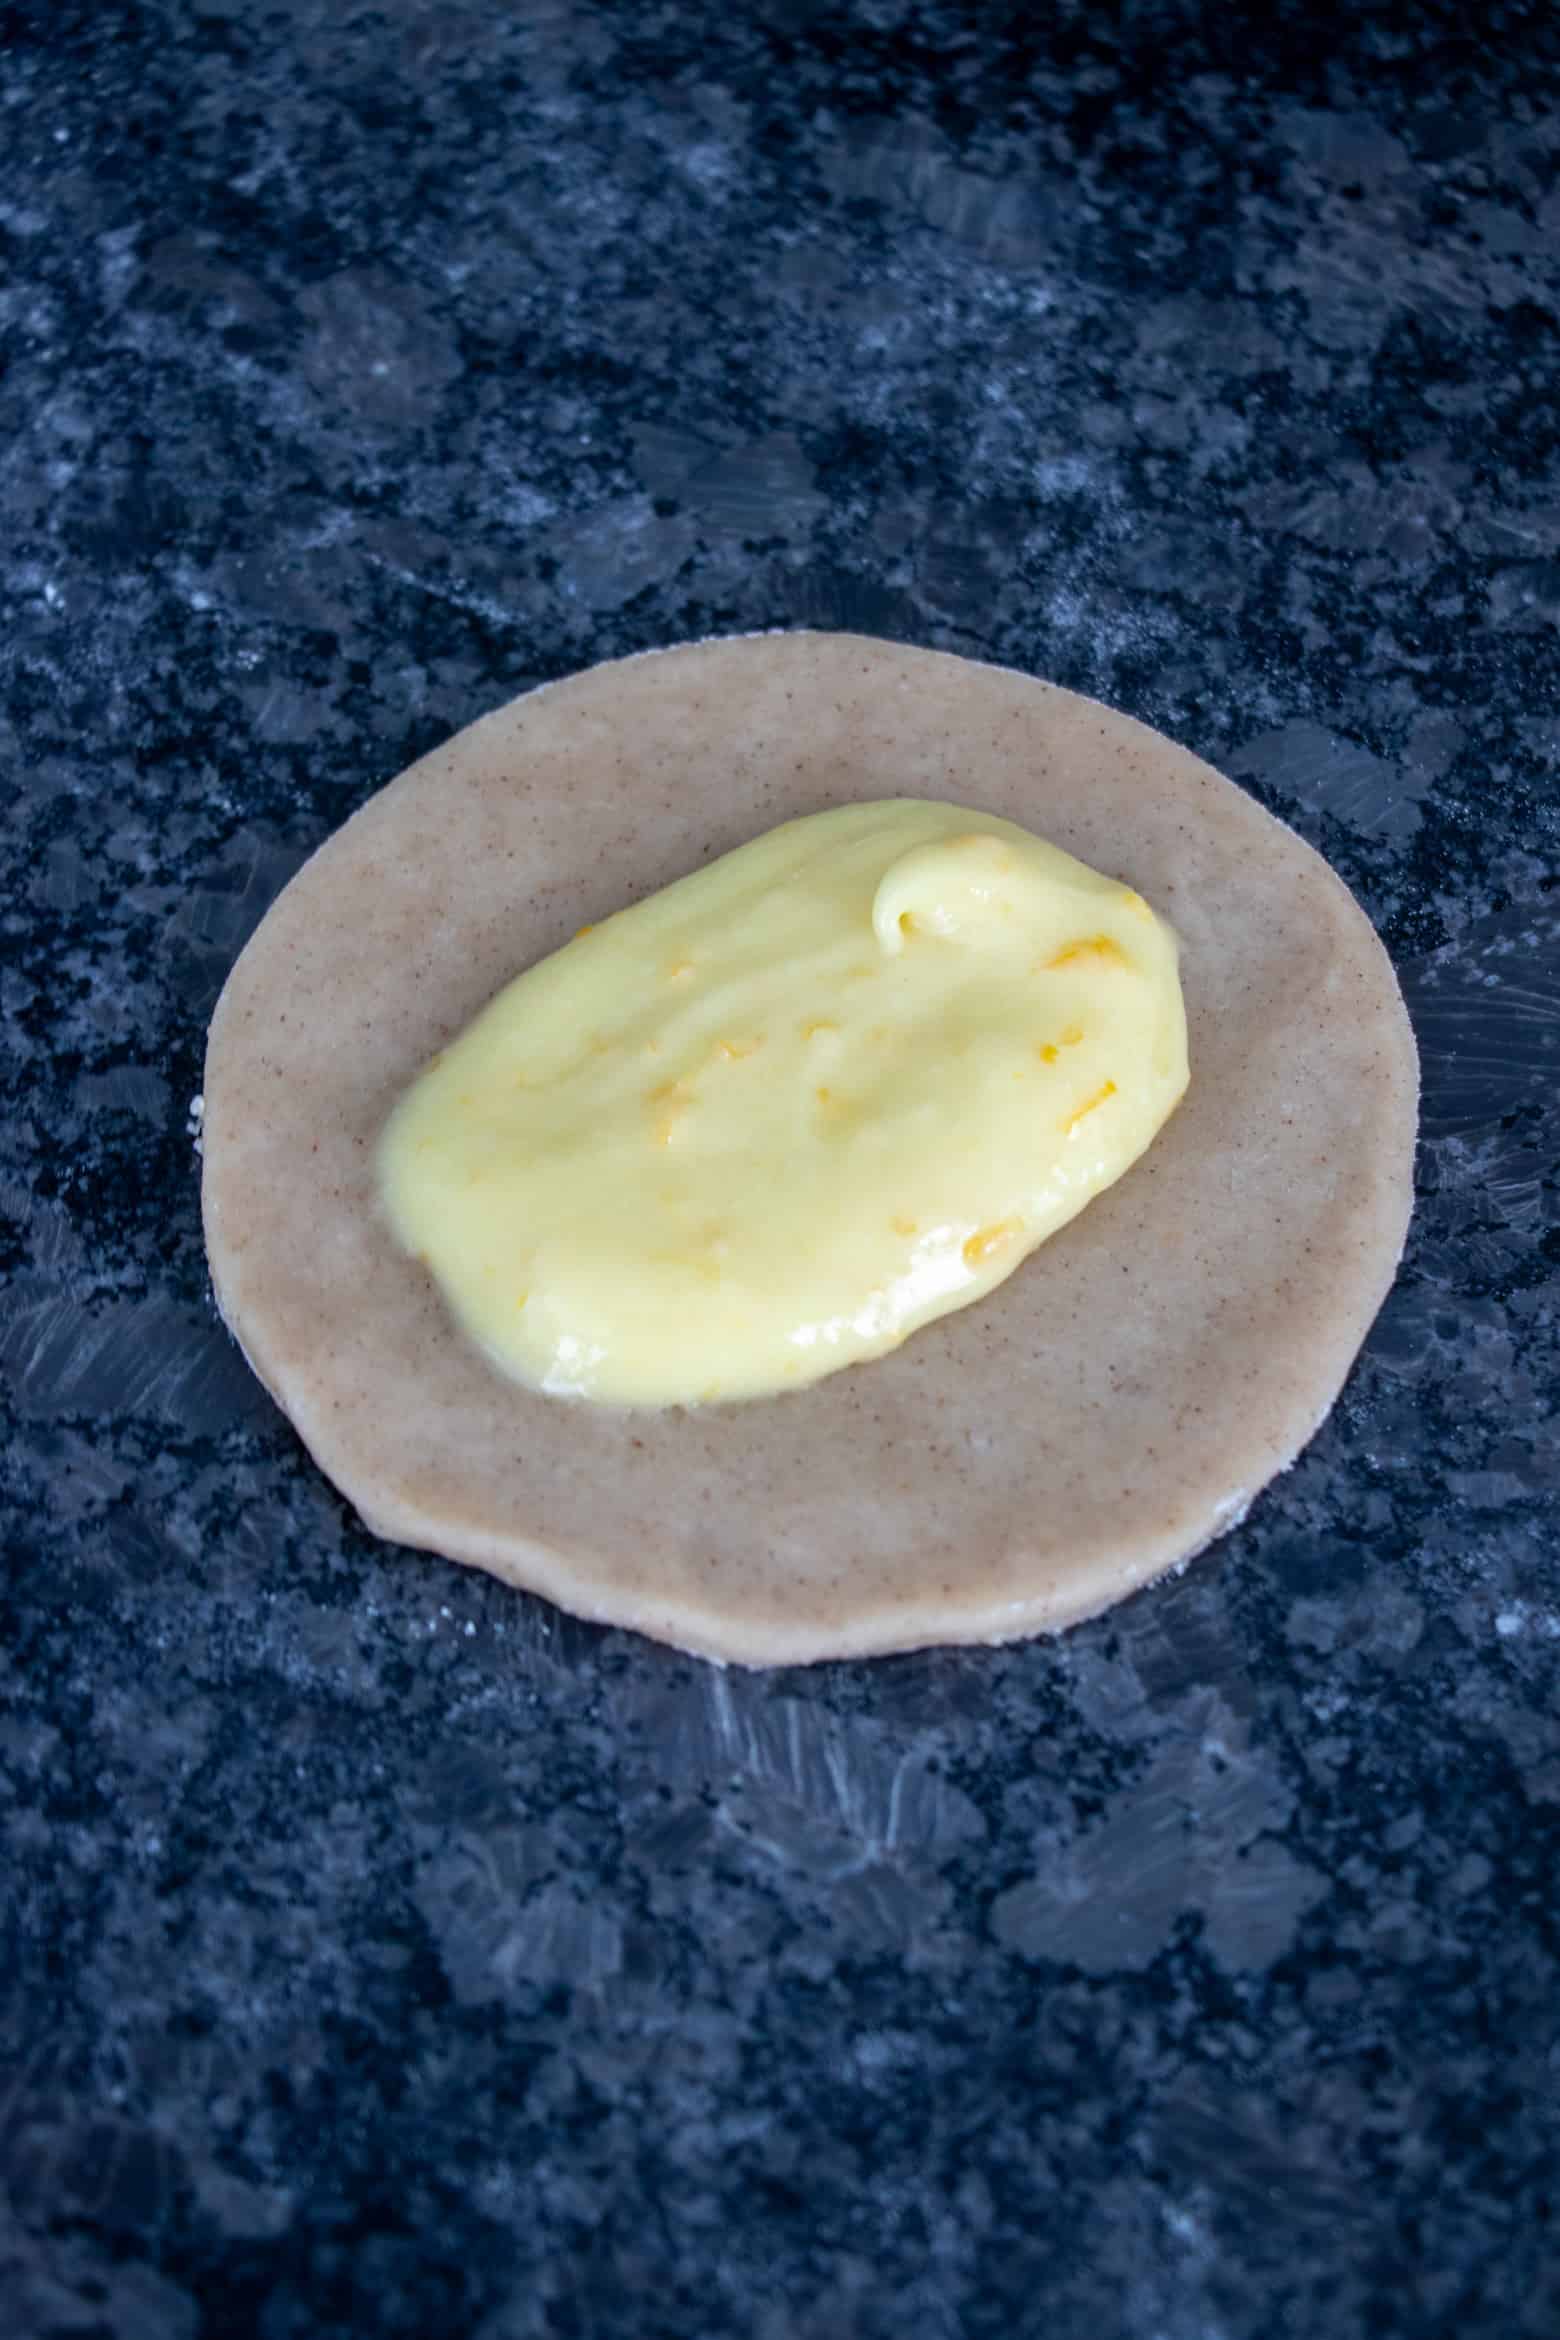 Lemon curd in the center of pie circle.